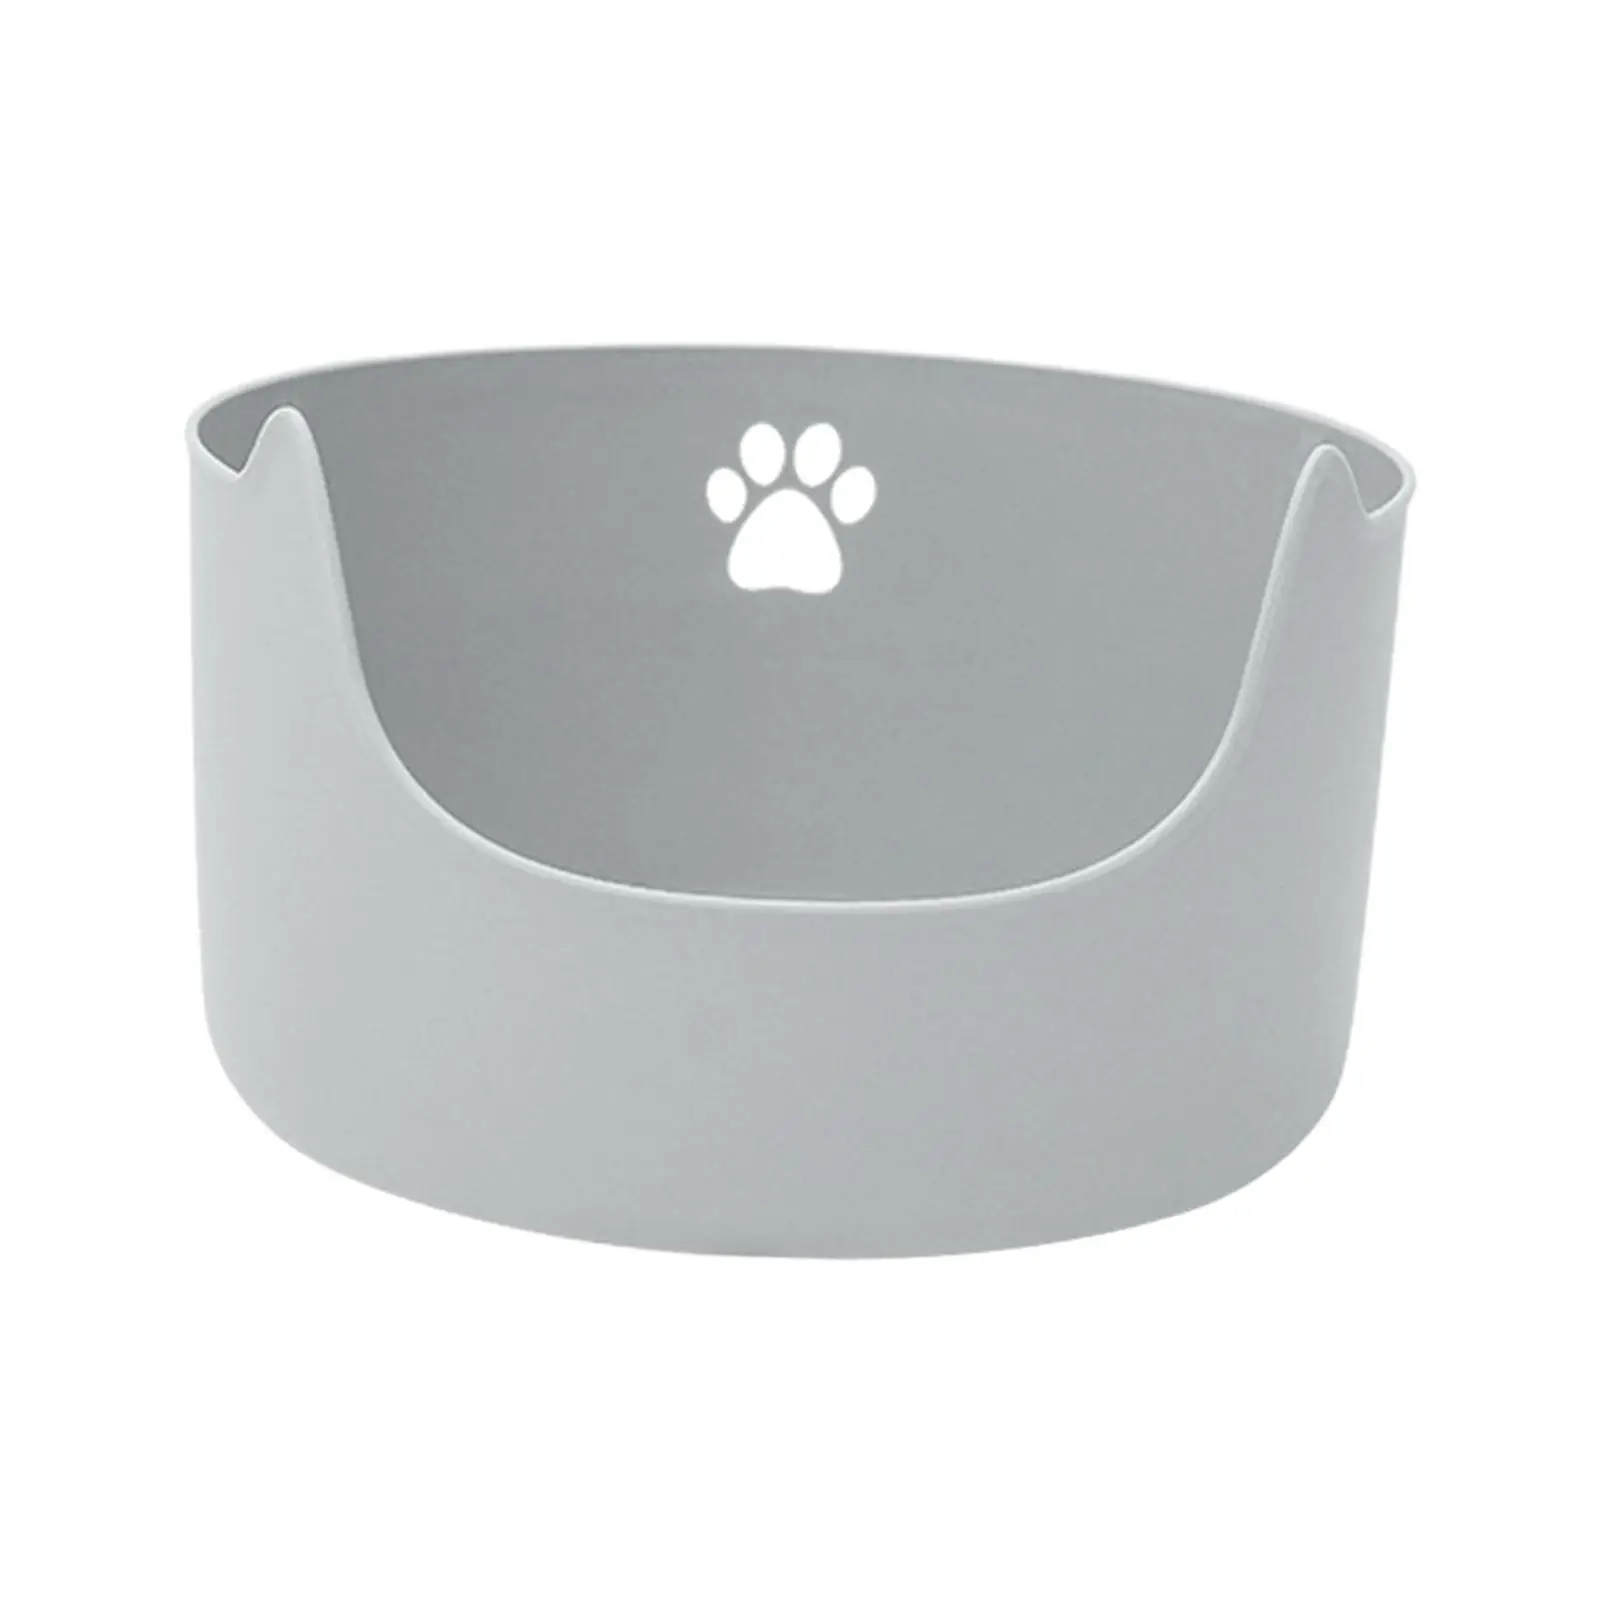 Cats Litter Pan with High Sides Pet Supplies Nonstick Durable Open Cats Litter Tray Large Space for Small and Large Cats